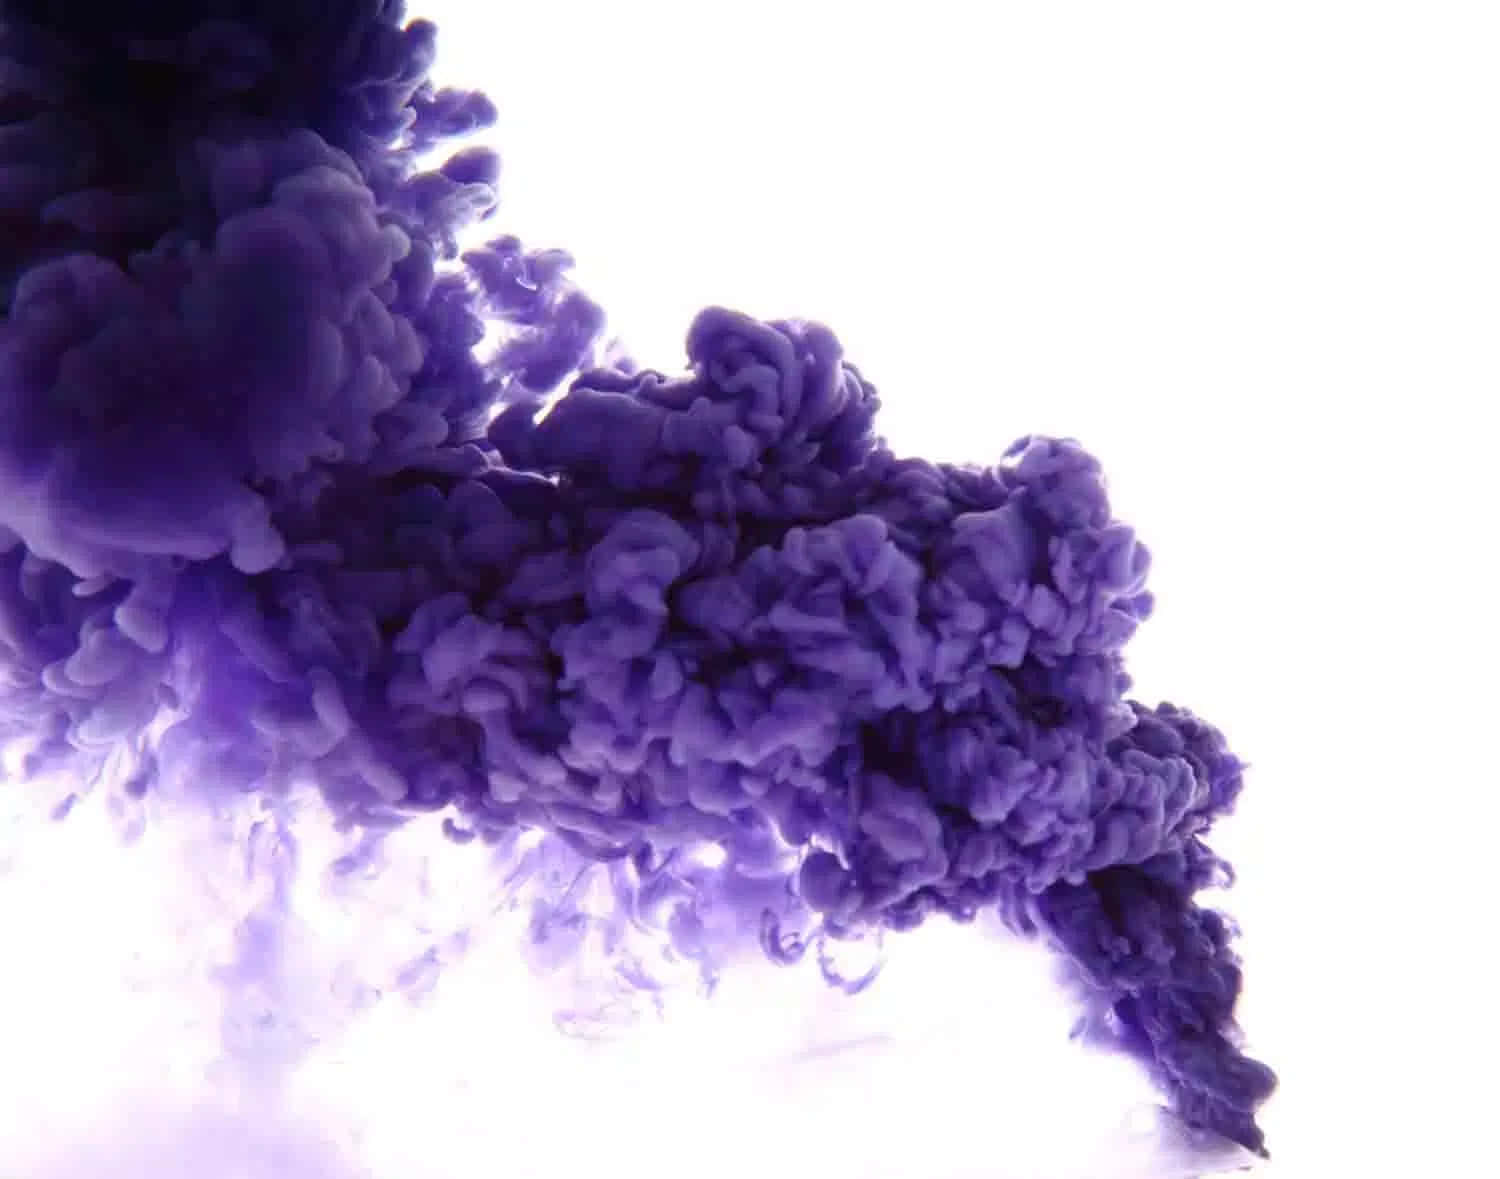 "Behold the Beauty of Multicolored Smoke" Wallpaper